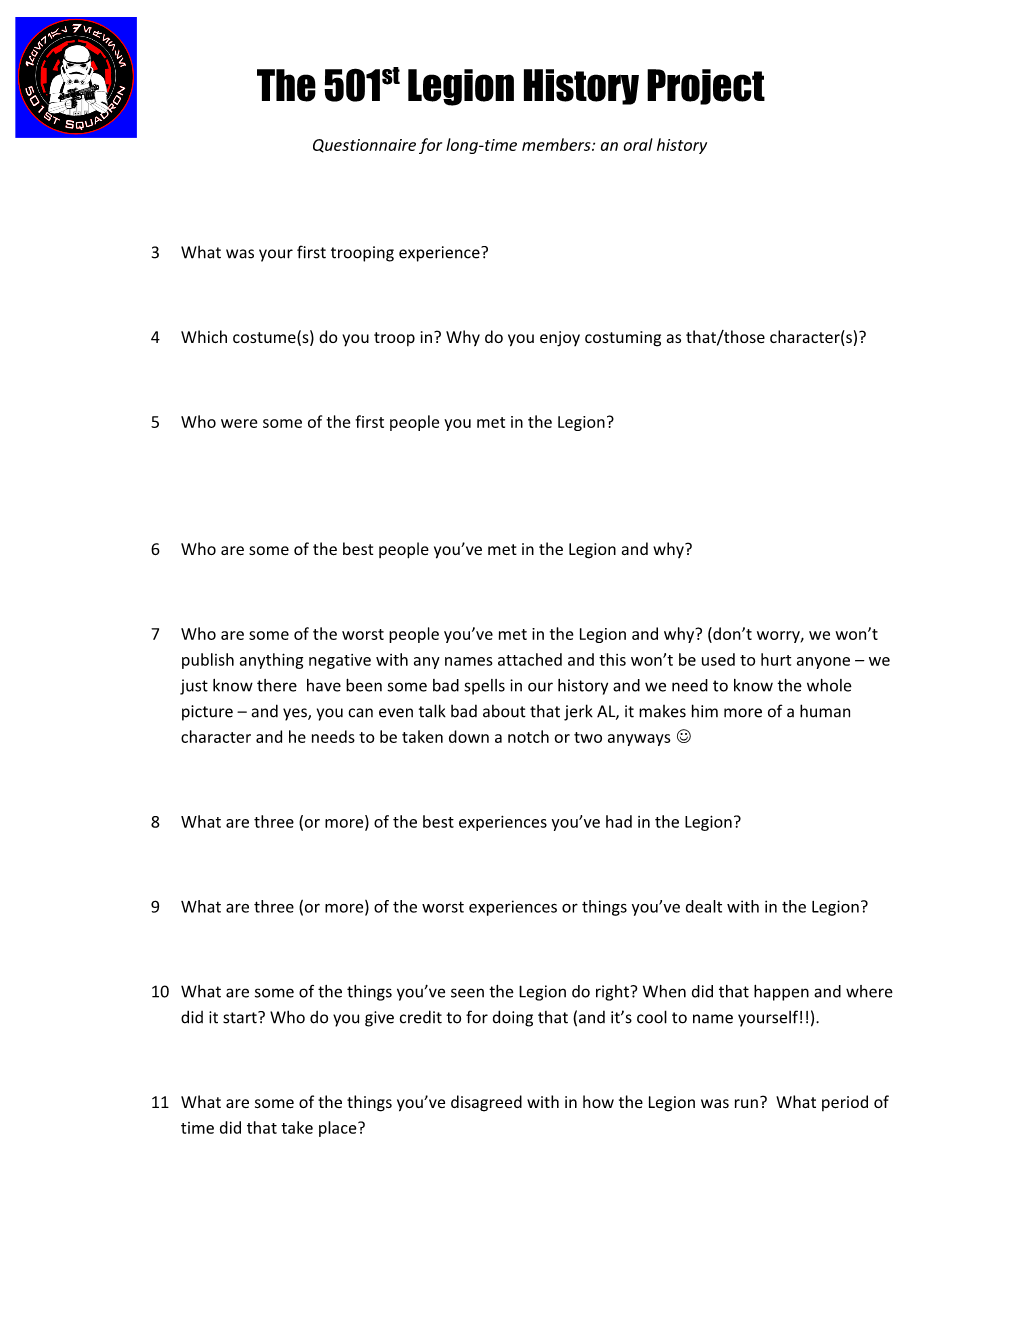 Questionnaire for Long-Time Members: an Oral History